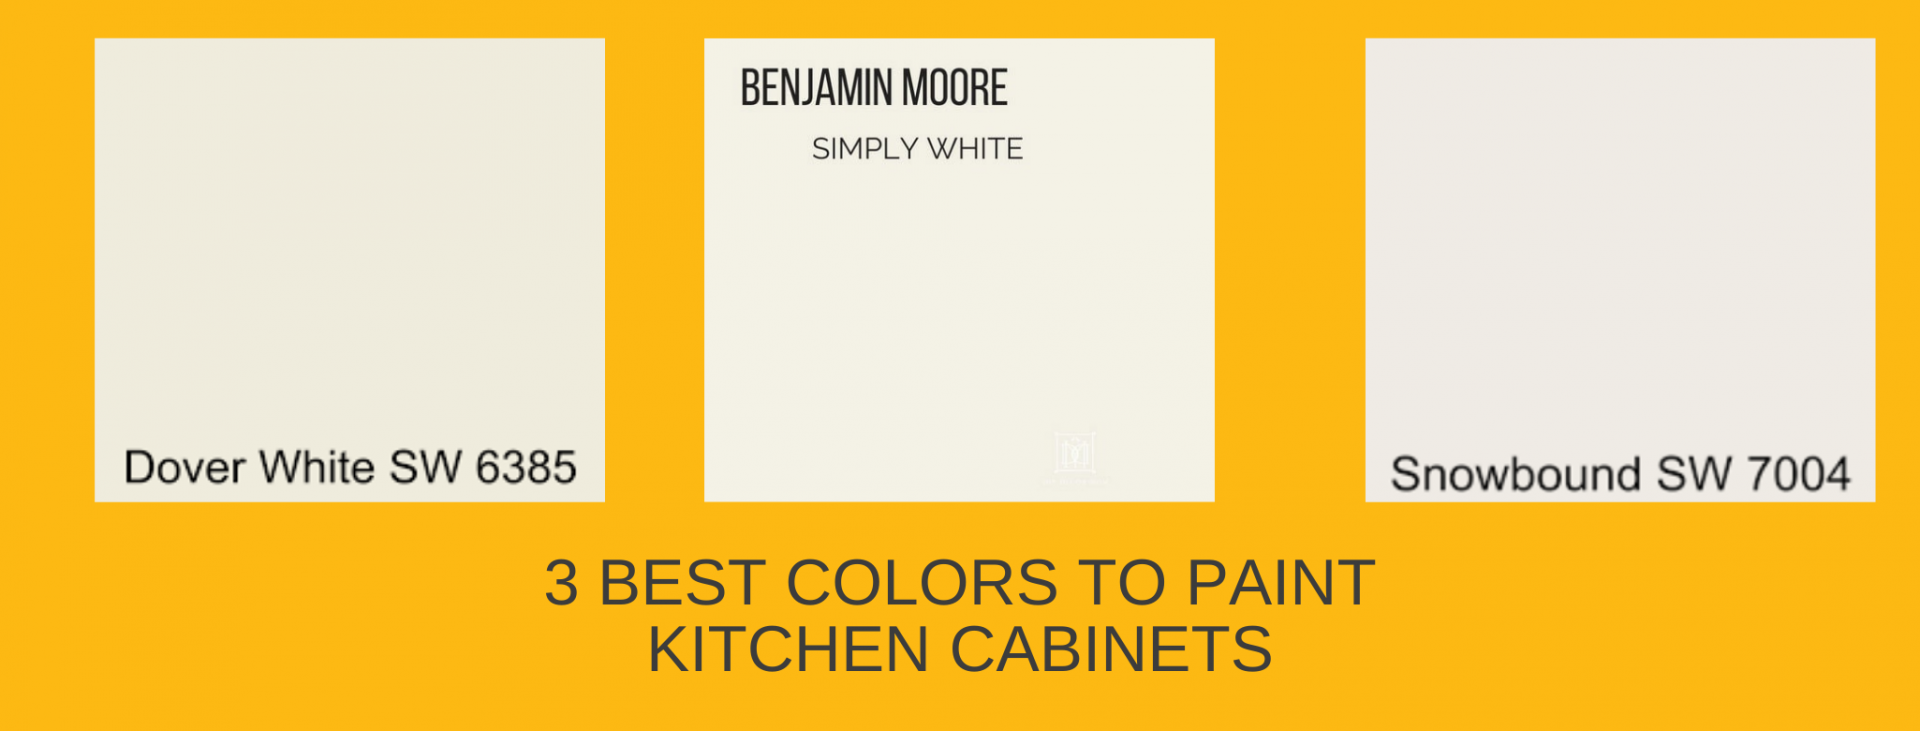 color swatches of dover white, benjamin moore, and snowbound